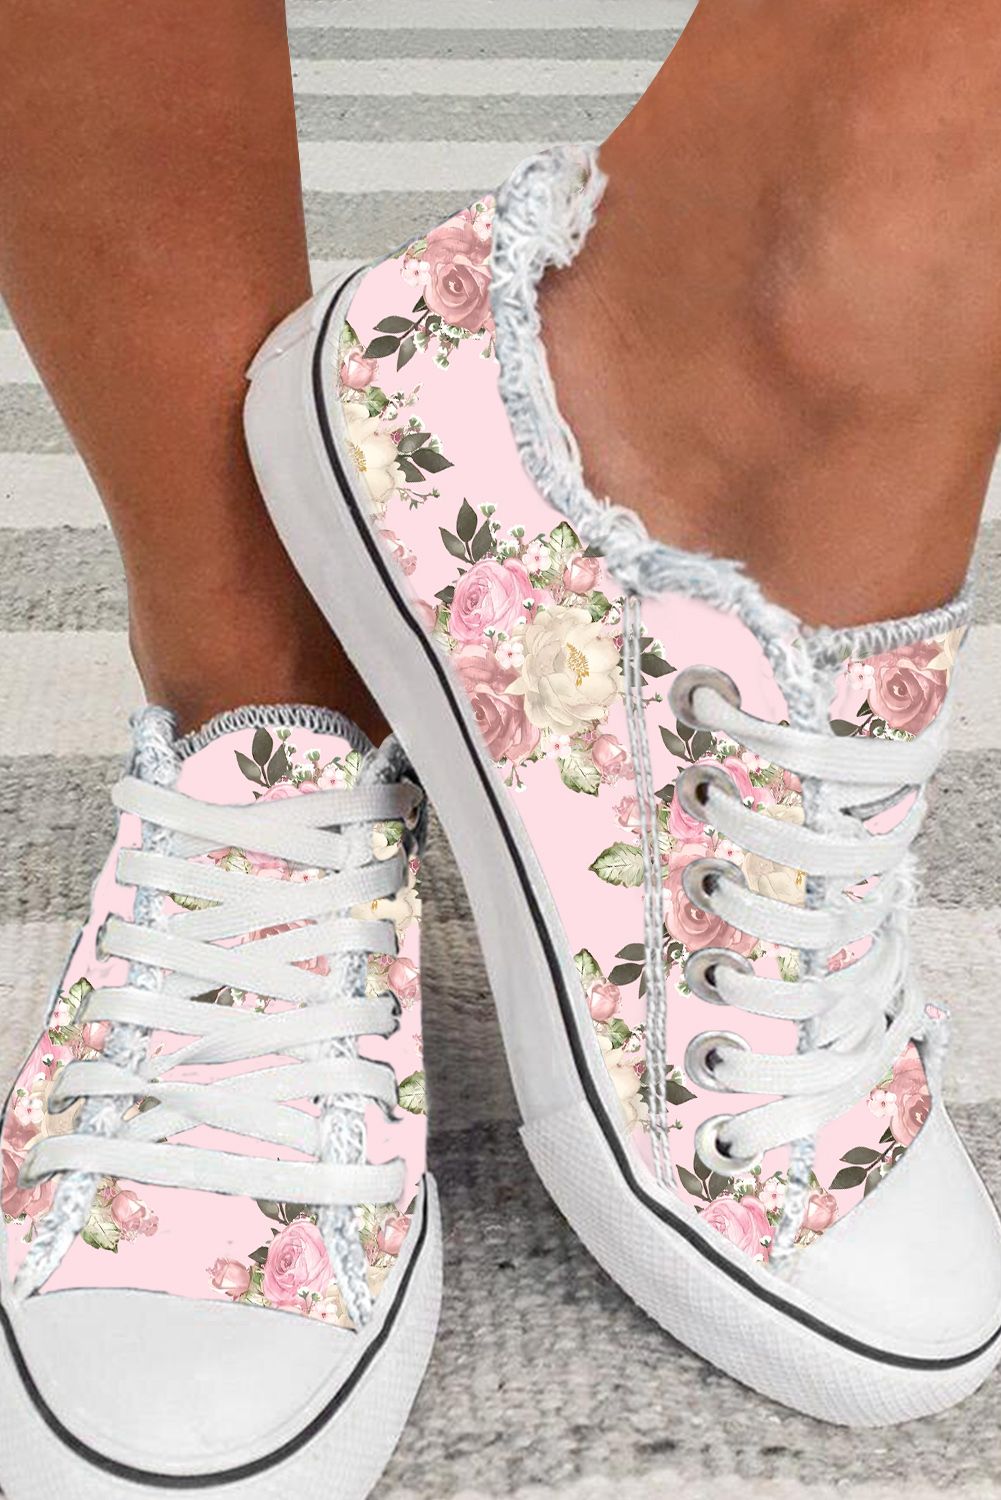 G By Guess Women's White Pink Floral Shoes Sneakers 8-1/2 M 8.5 GGMALLORY |  eBay